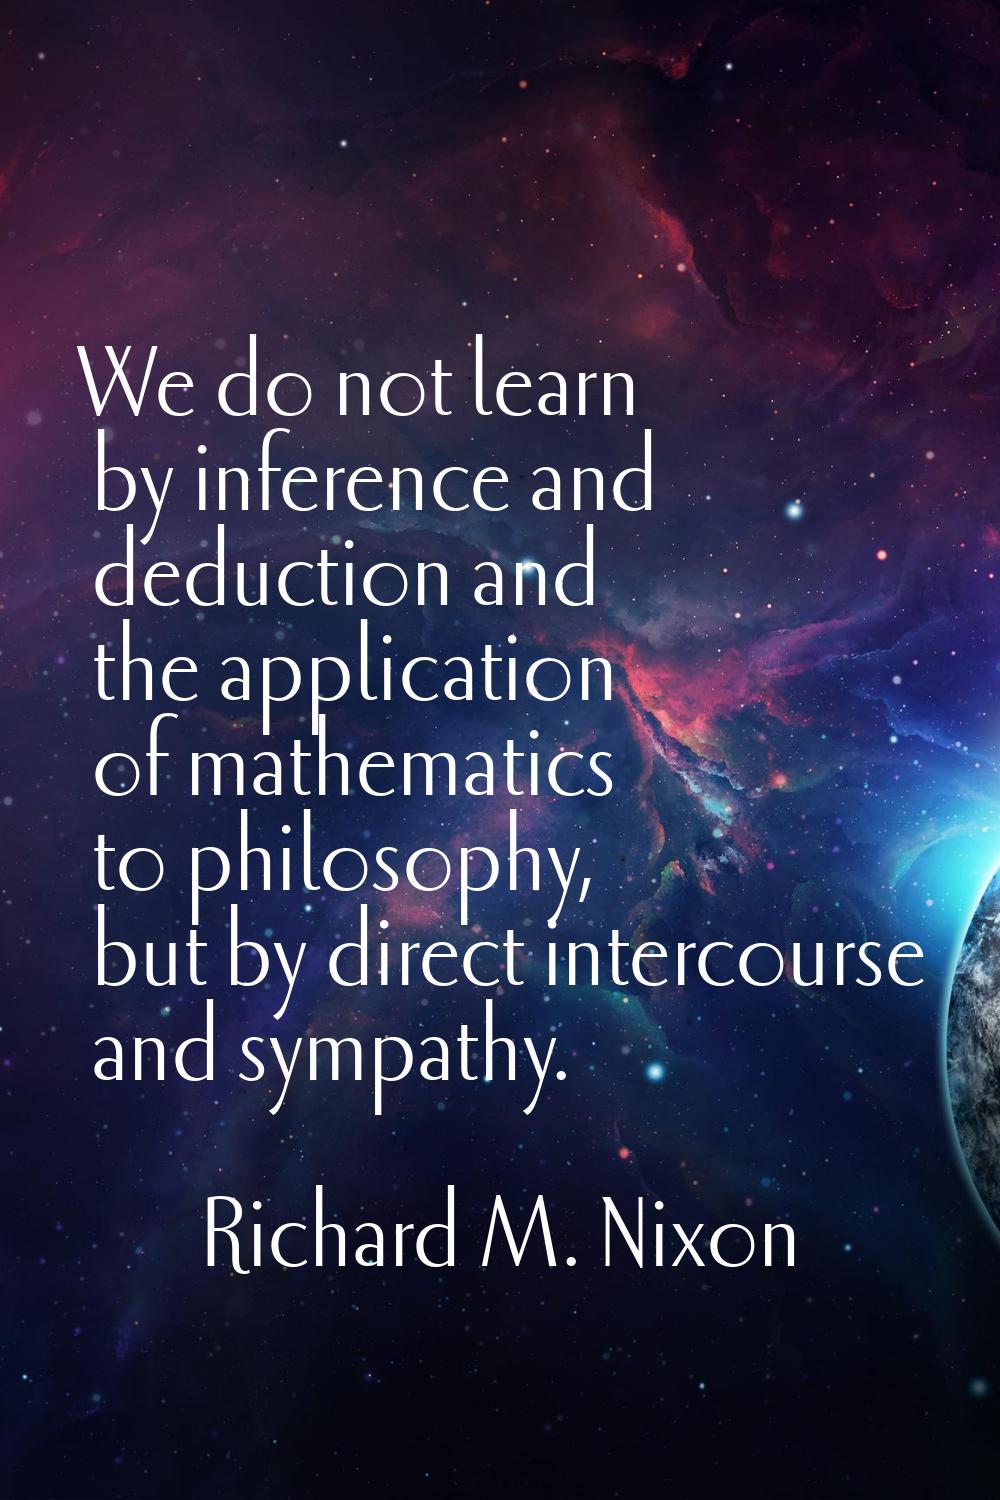 We do not learn by inference and deduction and the application of mathematics to philosophy, but by